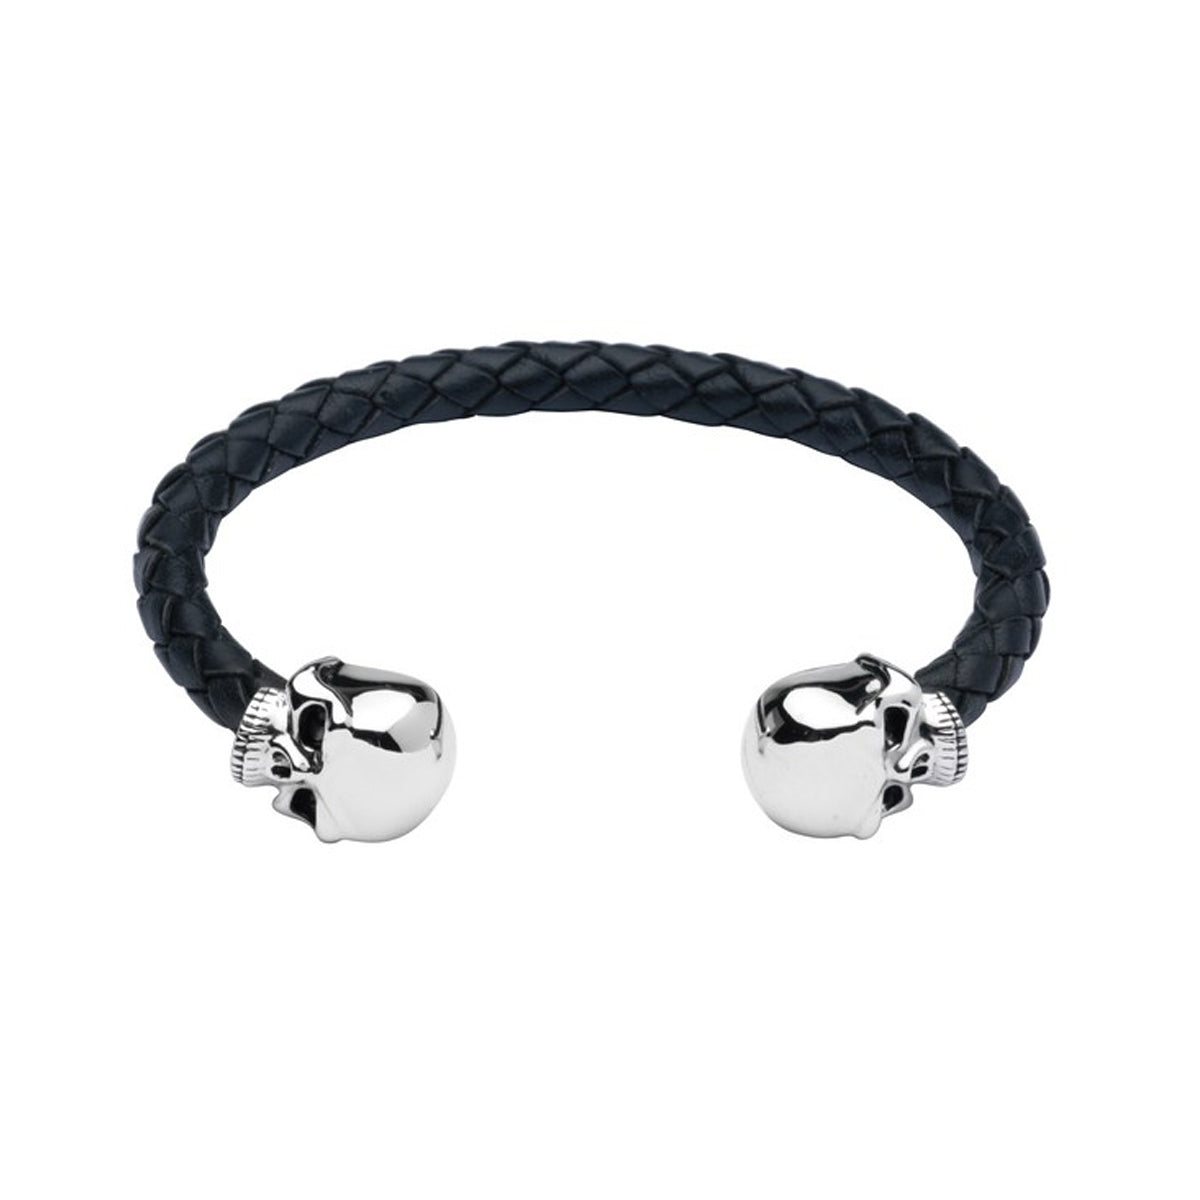 Deakin & Francis Leather Bangle with Skull Head Ends